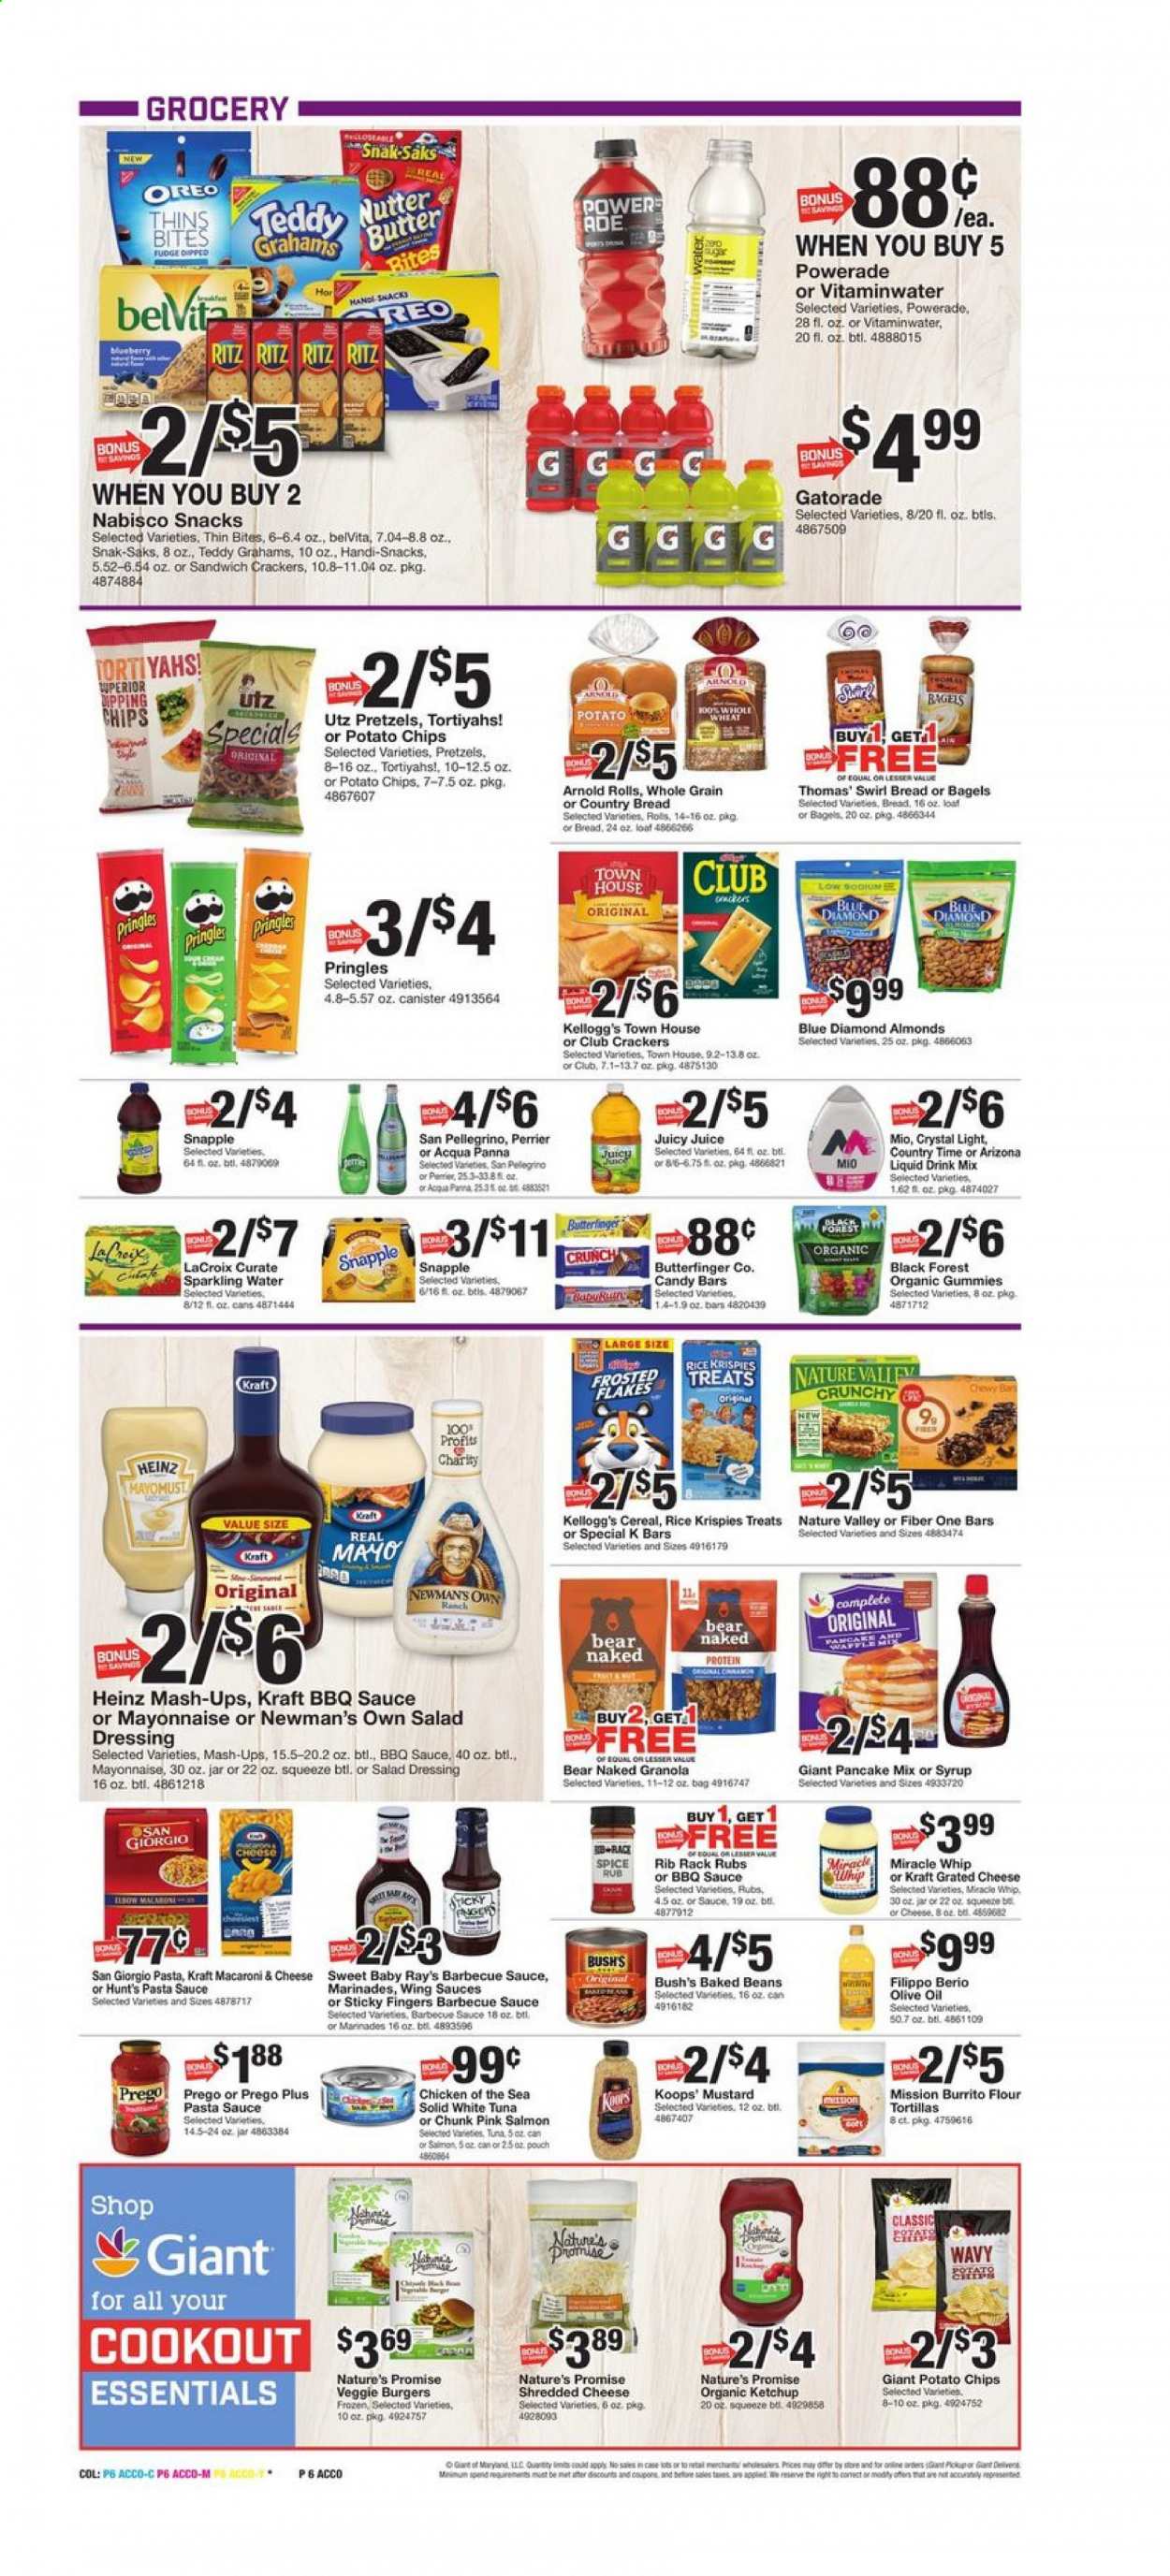 thumbnail - Giant Food Flyer - 06/25/2021 - 07/01/2021 - Sales products - bagels, tortillas, pretzels, Nature’s Promise, flour tortillas, beans, salmon, tuna, macaroni & cheese, pasta sauce, pancakes, burrito, veggie burger, Kraft®, shredded cheese, grated cheese, Oreo, butter, Miracle Whip, fudge, snack, crackers, Kellogg's, RITZ, potato chips, Pringles, Thins, Heinz, baked beans, Chicken of the Sea, cereals, granola, Rice Krispies, Frosted Flakes, belVita, Nature Valley, Fiber One, spice, cinnamon, BBQ sauce, mustard, salad dressing, ketchup, dressing, olive oil, oil, almonds, Blue Diamond, Powerade, juice, AriZona, Snapple, Bai, Perrier, Country Time, Gatorade, sparkling water, San Pellegrino. Page 10.